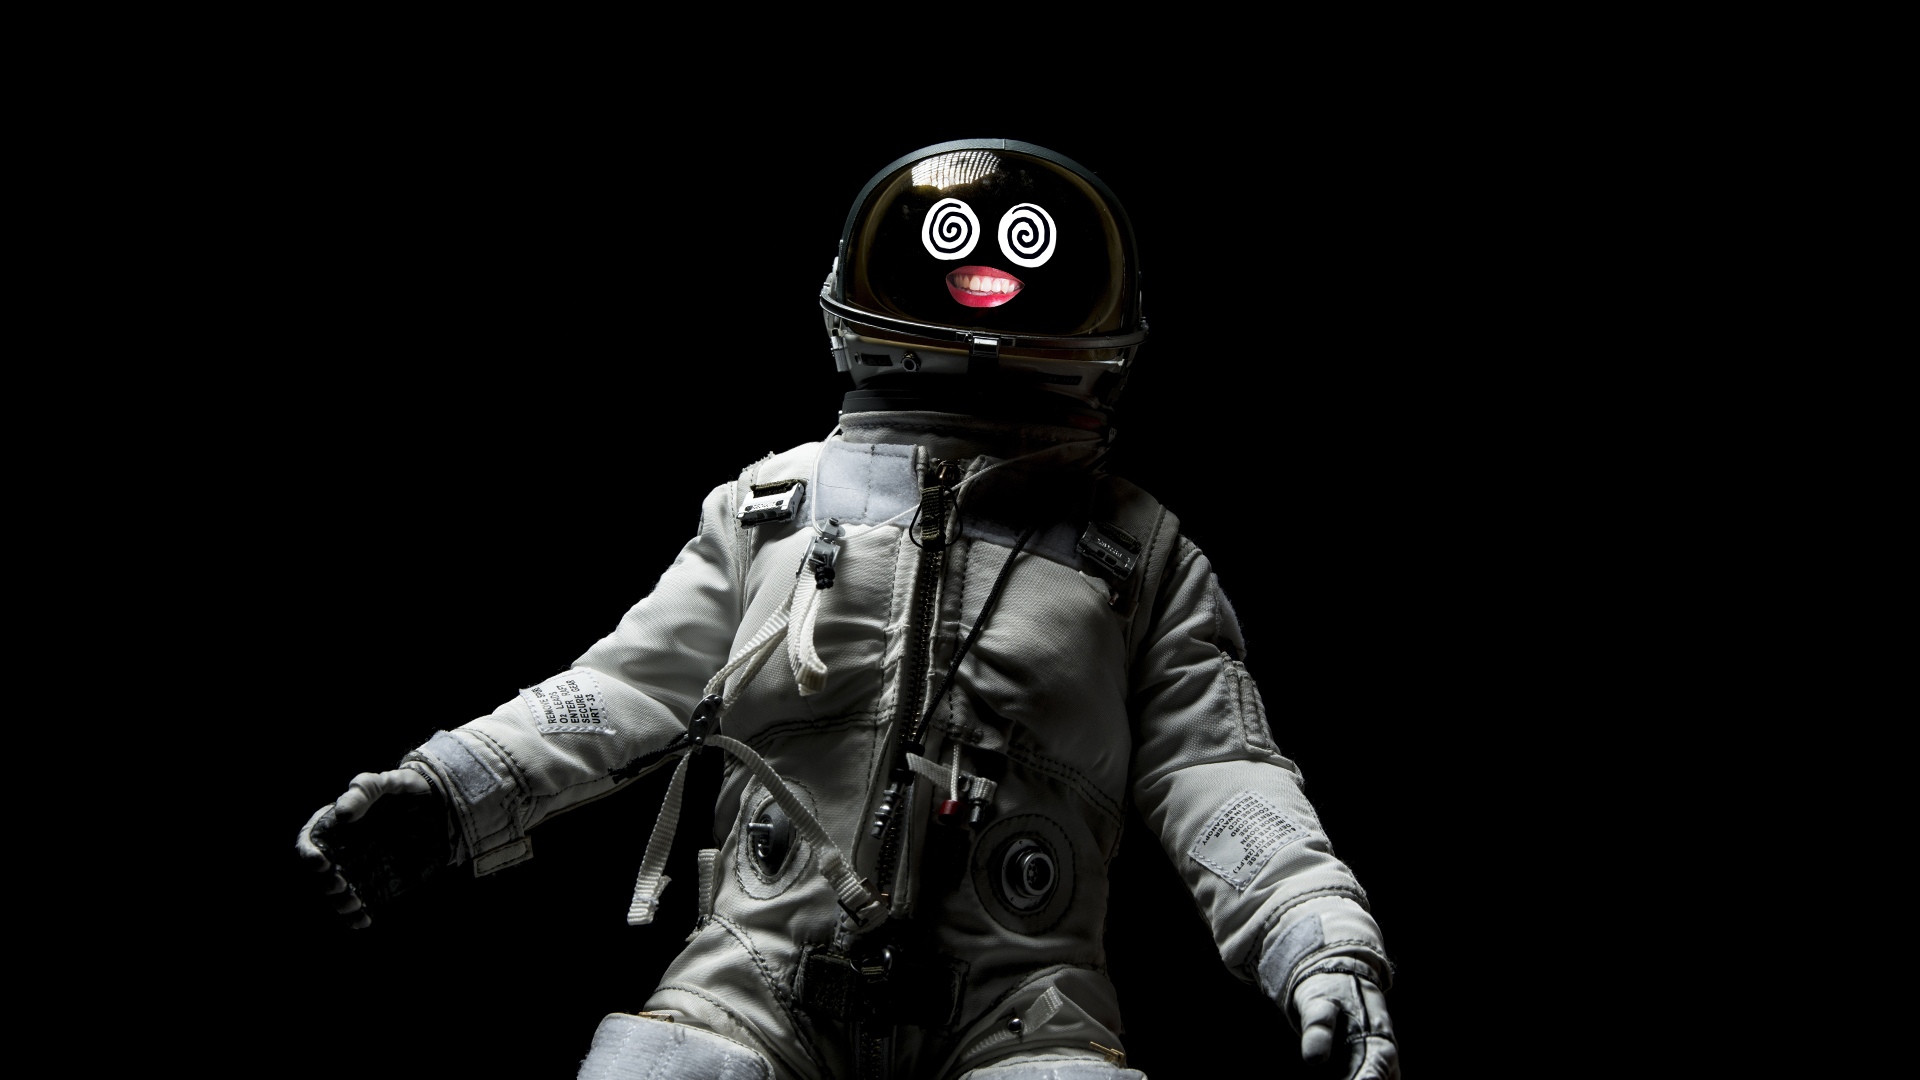 An astronaut listening to Coldplay